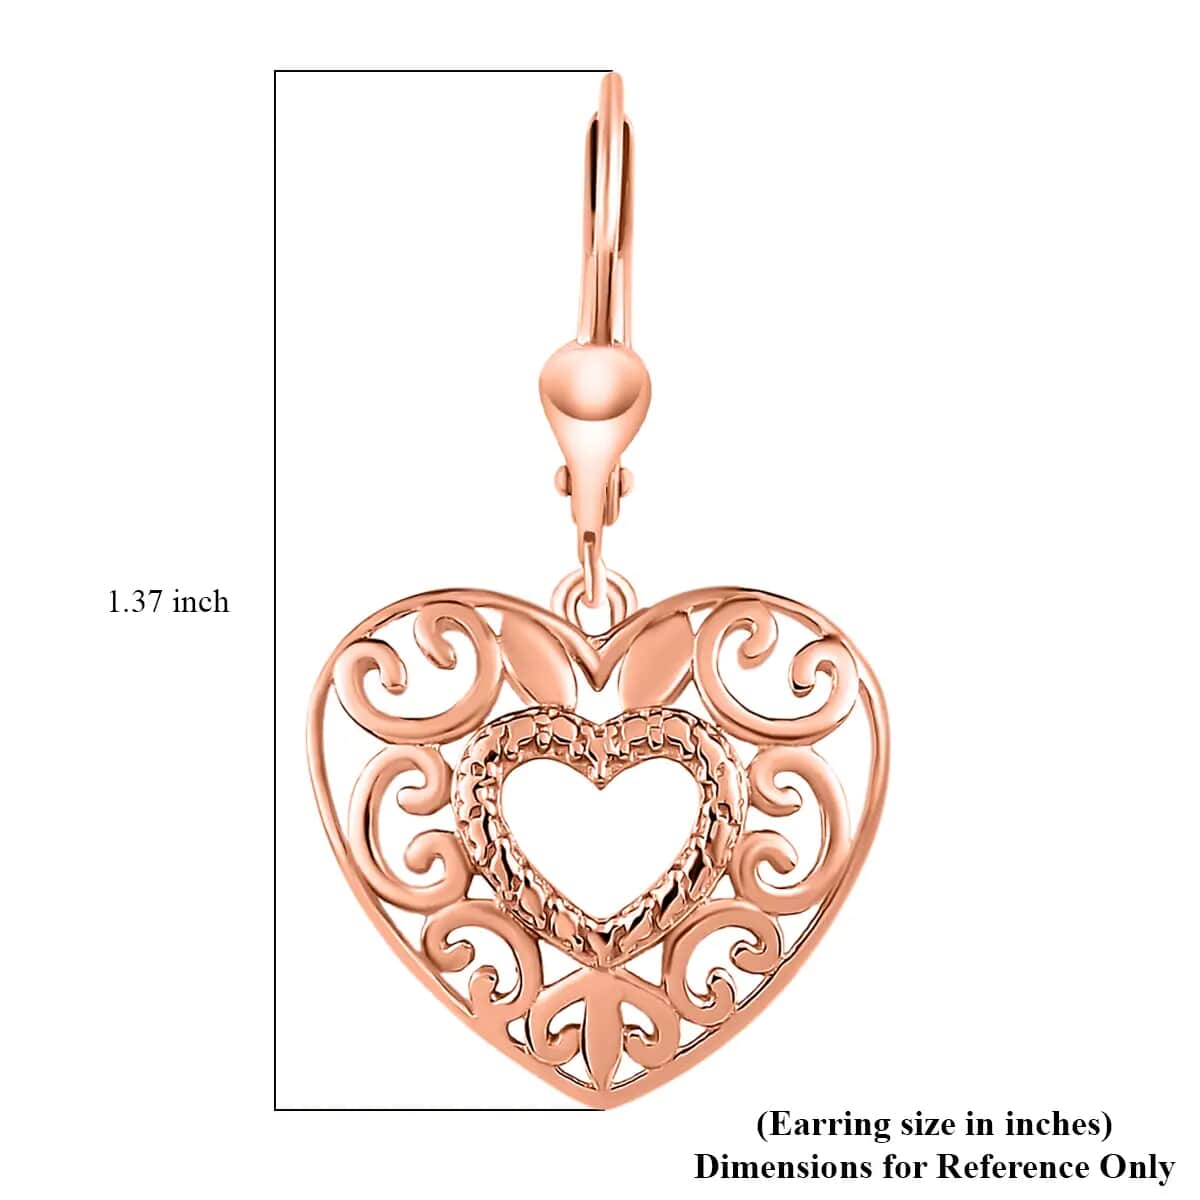 Mother’s Day Gift Openwork Earrings, Filigree Earrings, Lever Back Earrings, Drop Earrings, 14K Rose Gold Plated Sterling Silver Earrings, Heart Earrings For Women, Jewelry Gifts For Birthday image number 6